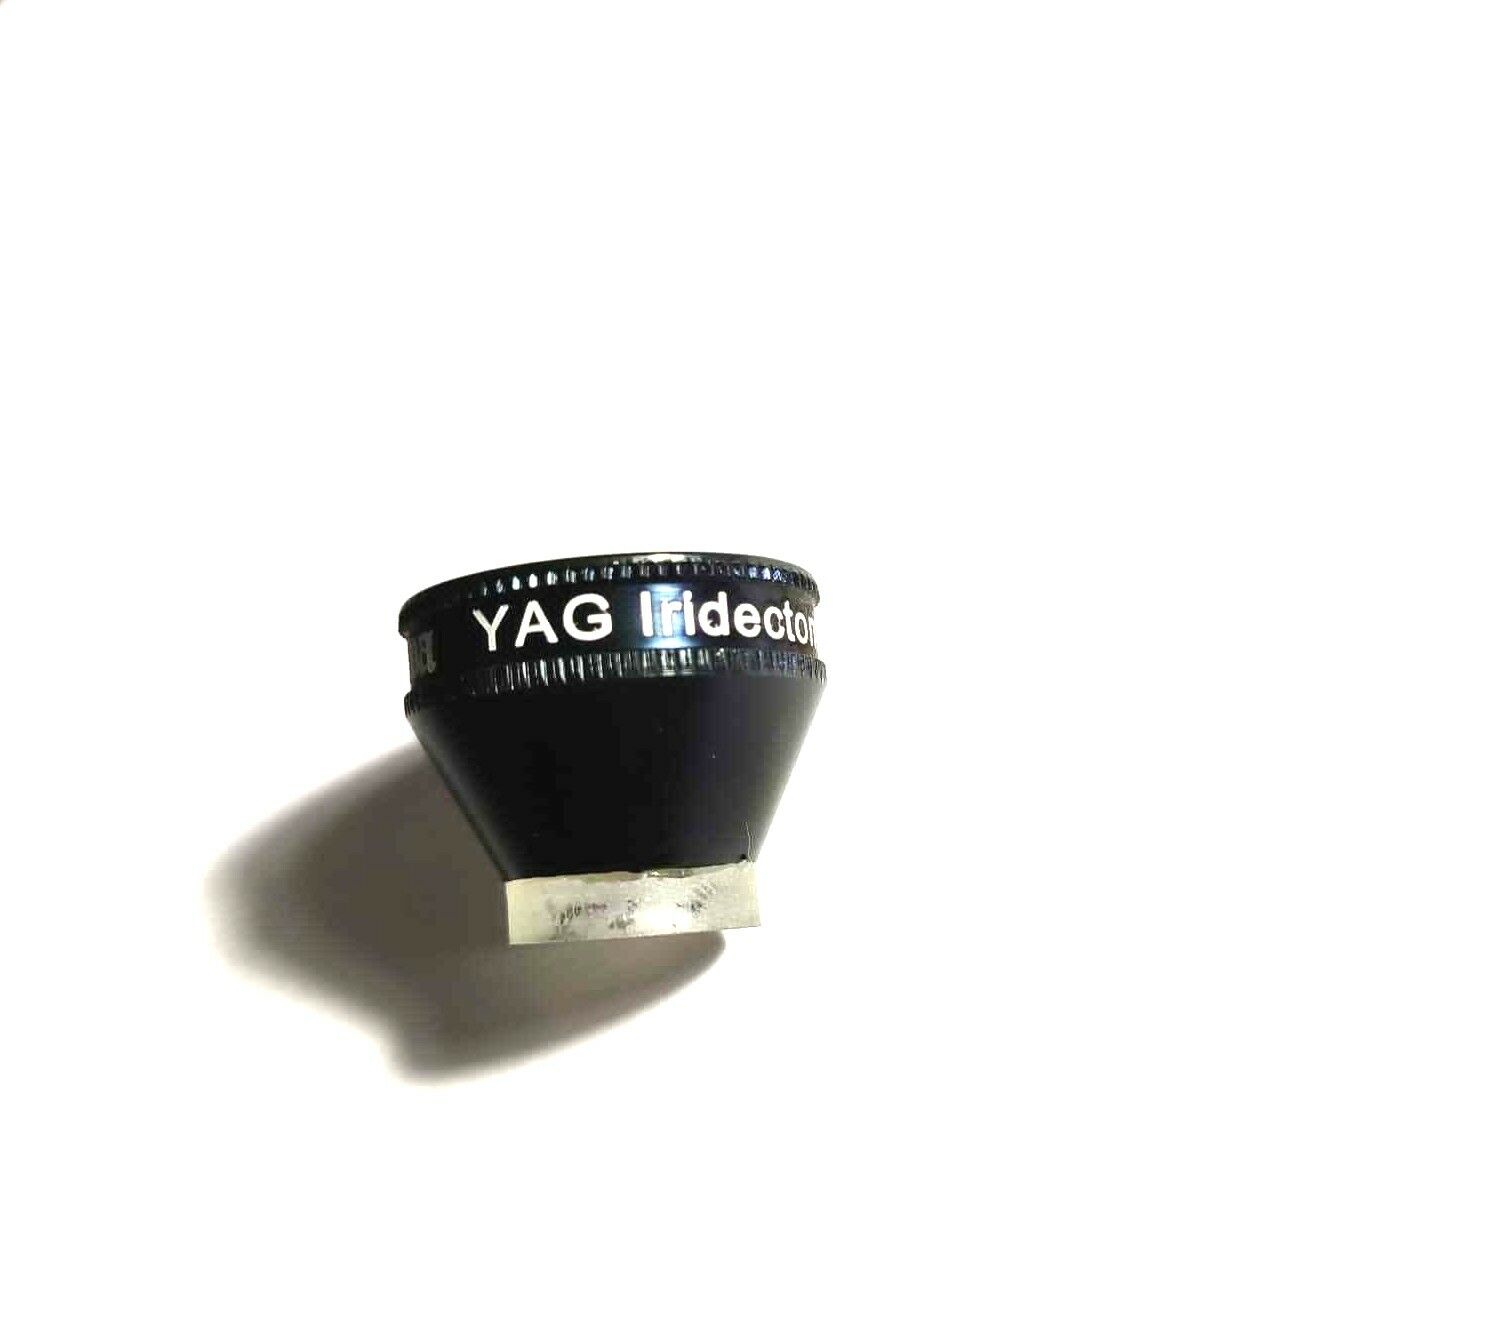 Yag Iridectomy Lens For Yag Laser Surgery With Protective Case Free Shipping